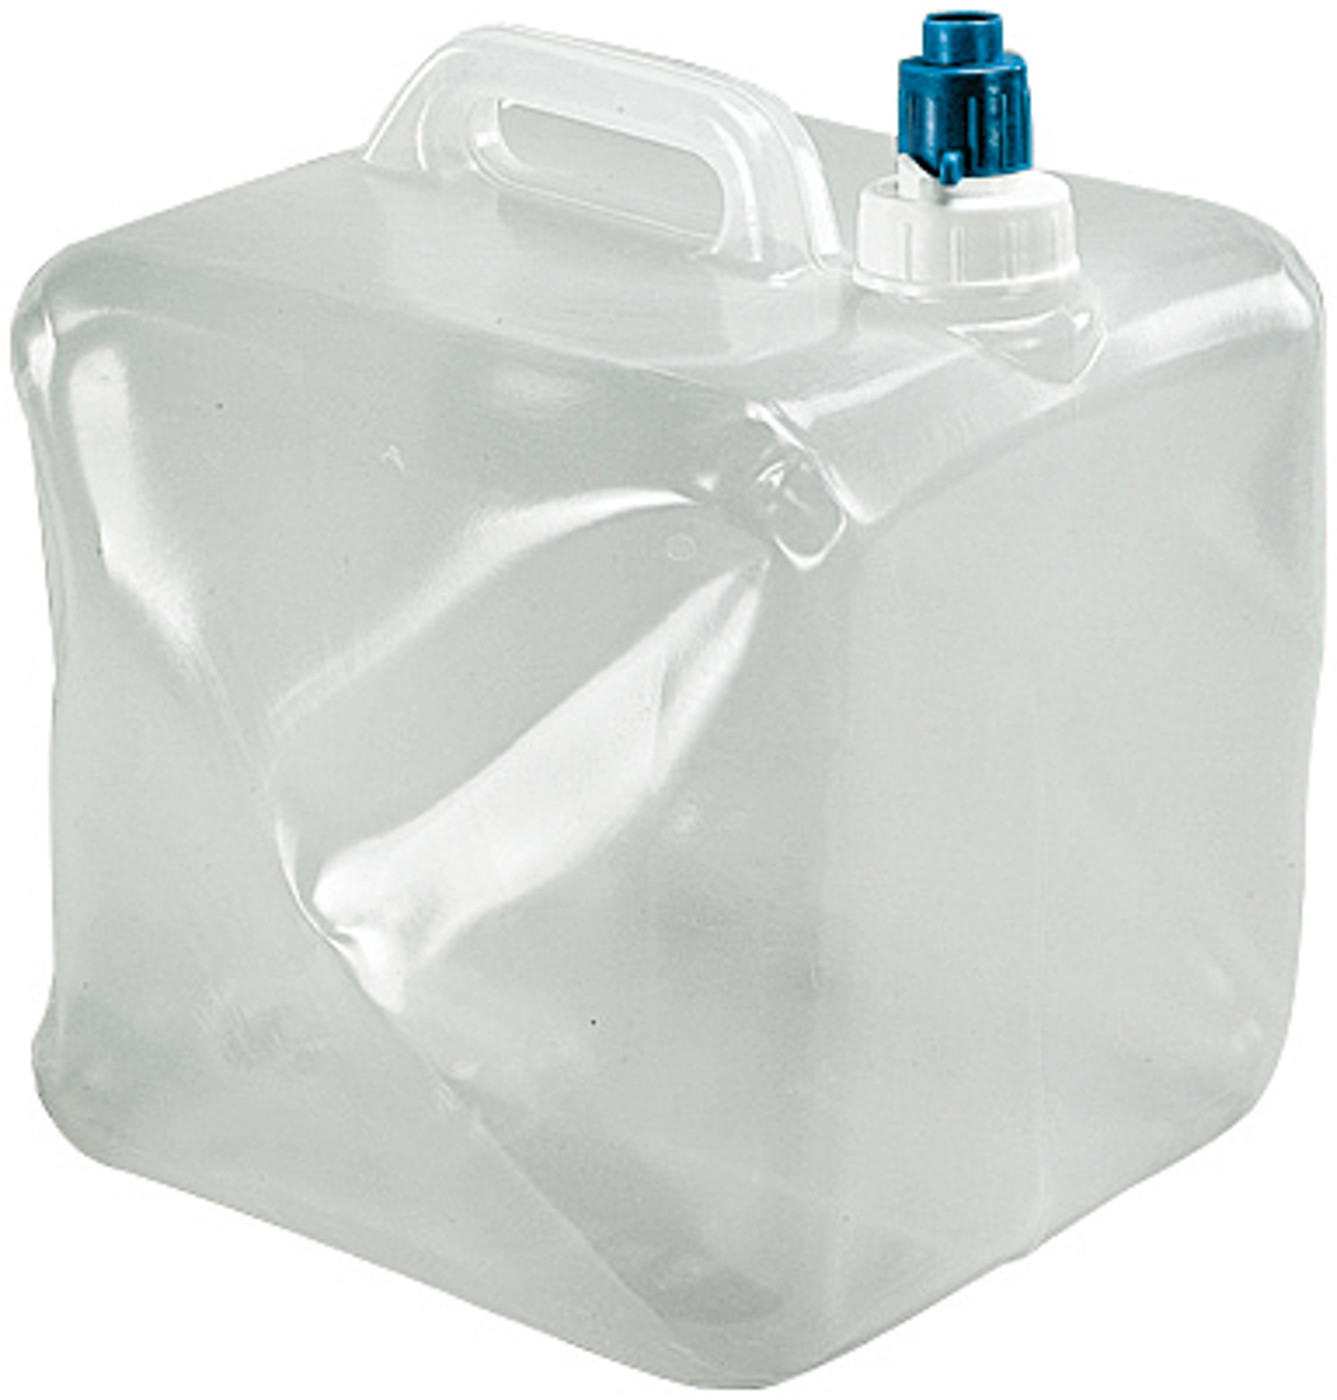 HIGH COLORADO COLLAPSIBLE WATER CARRIER